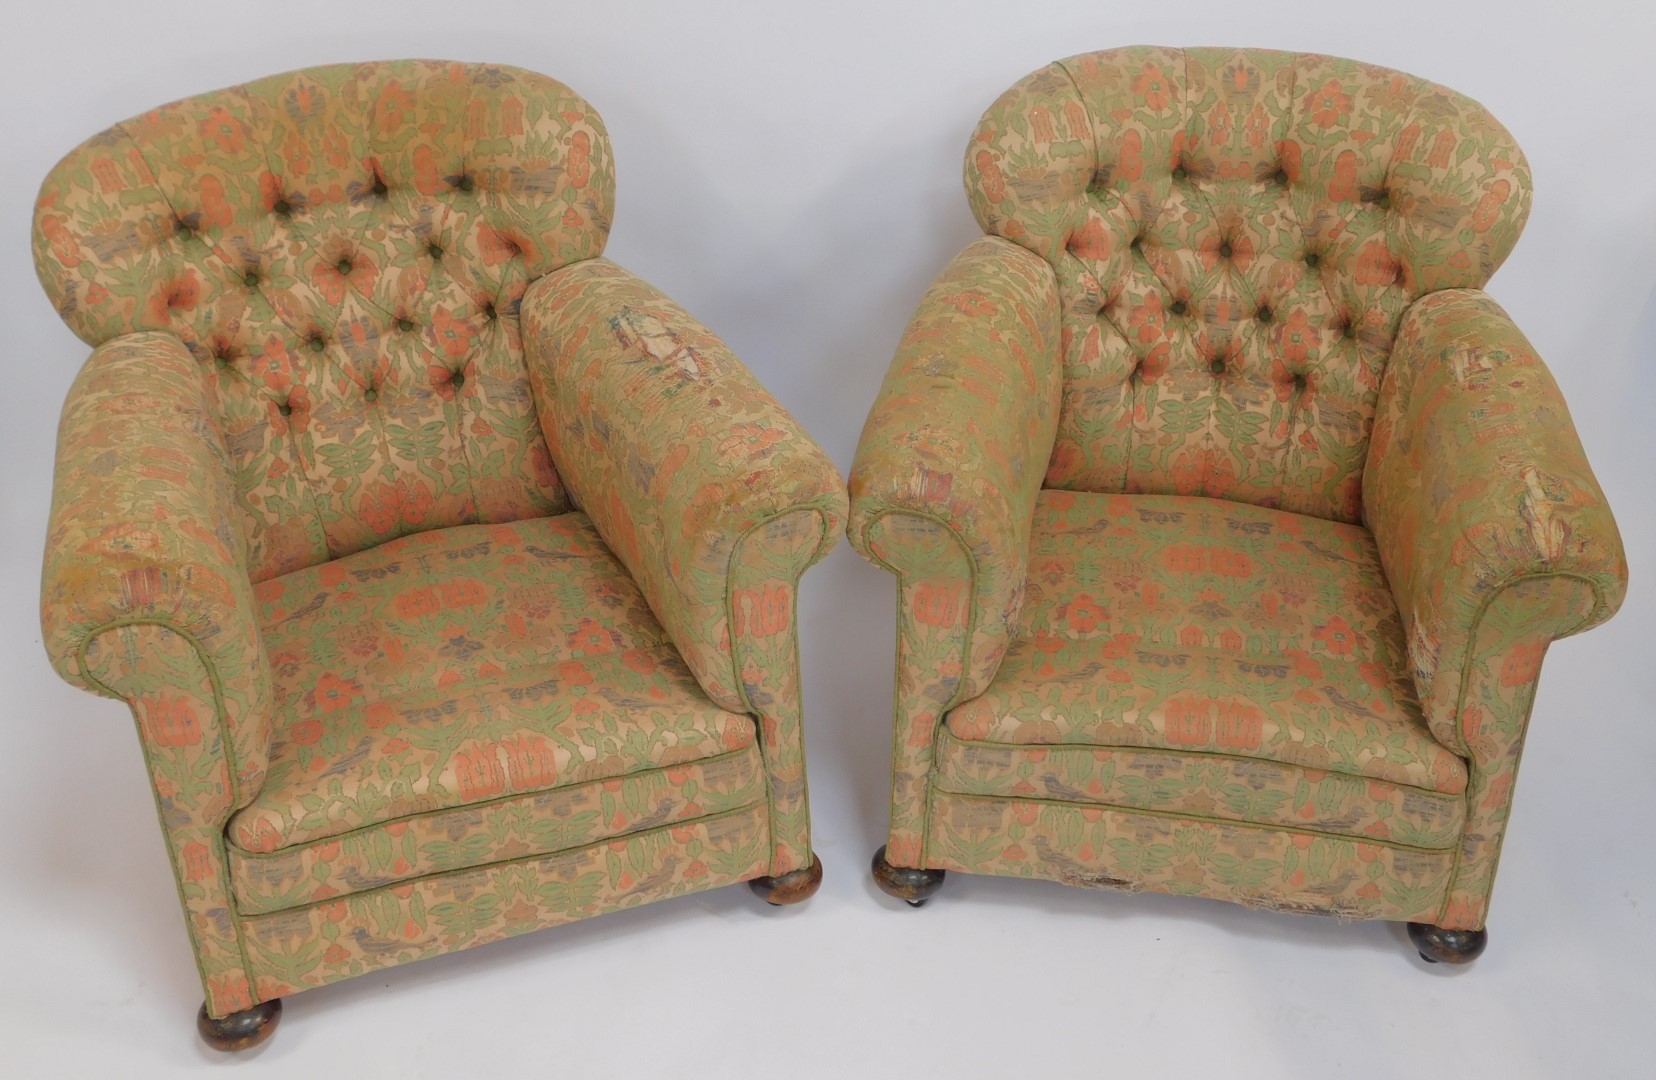 A pair of Victorian armchairs, each with a curved studded back upholstered in floral fabric, on - Image 2 of 7